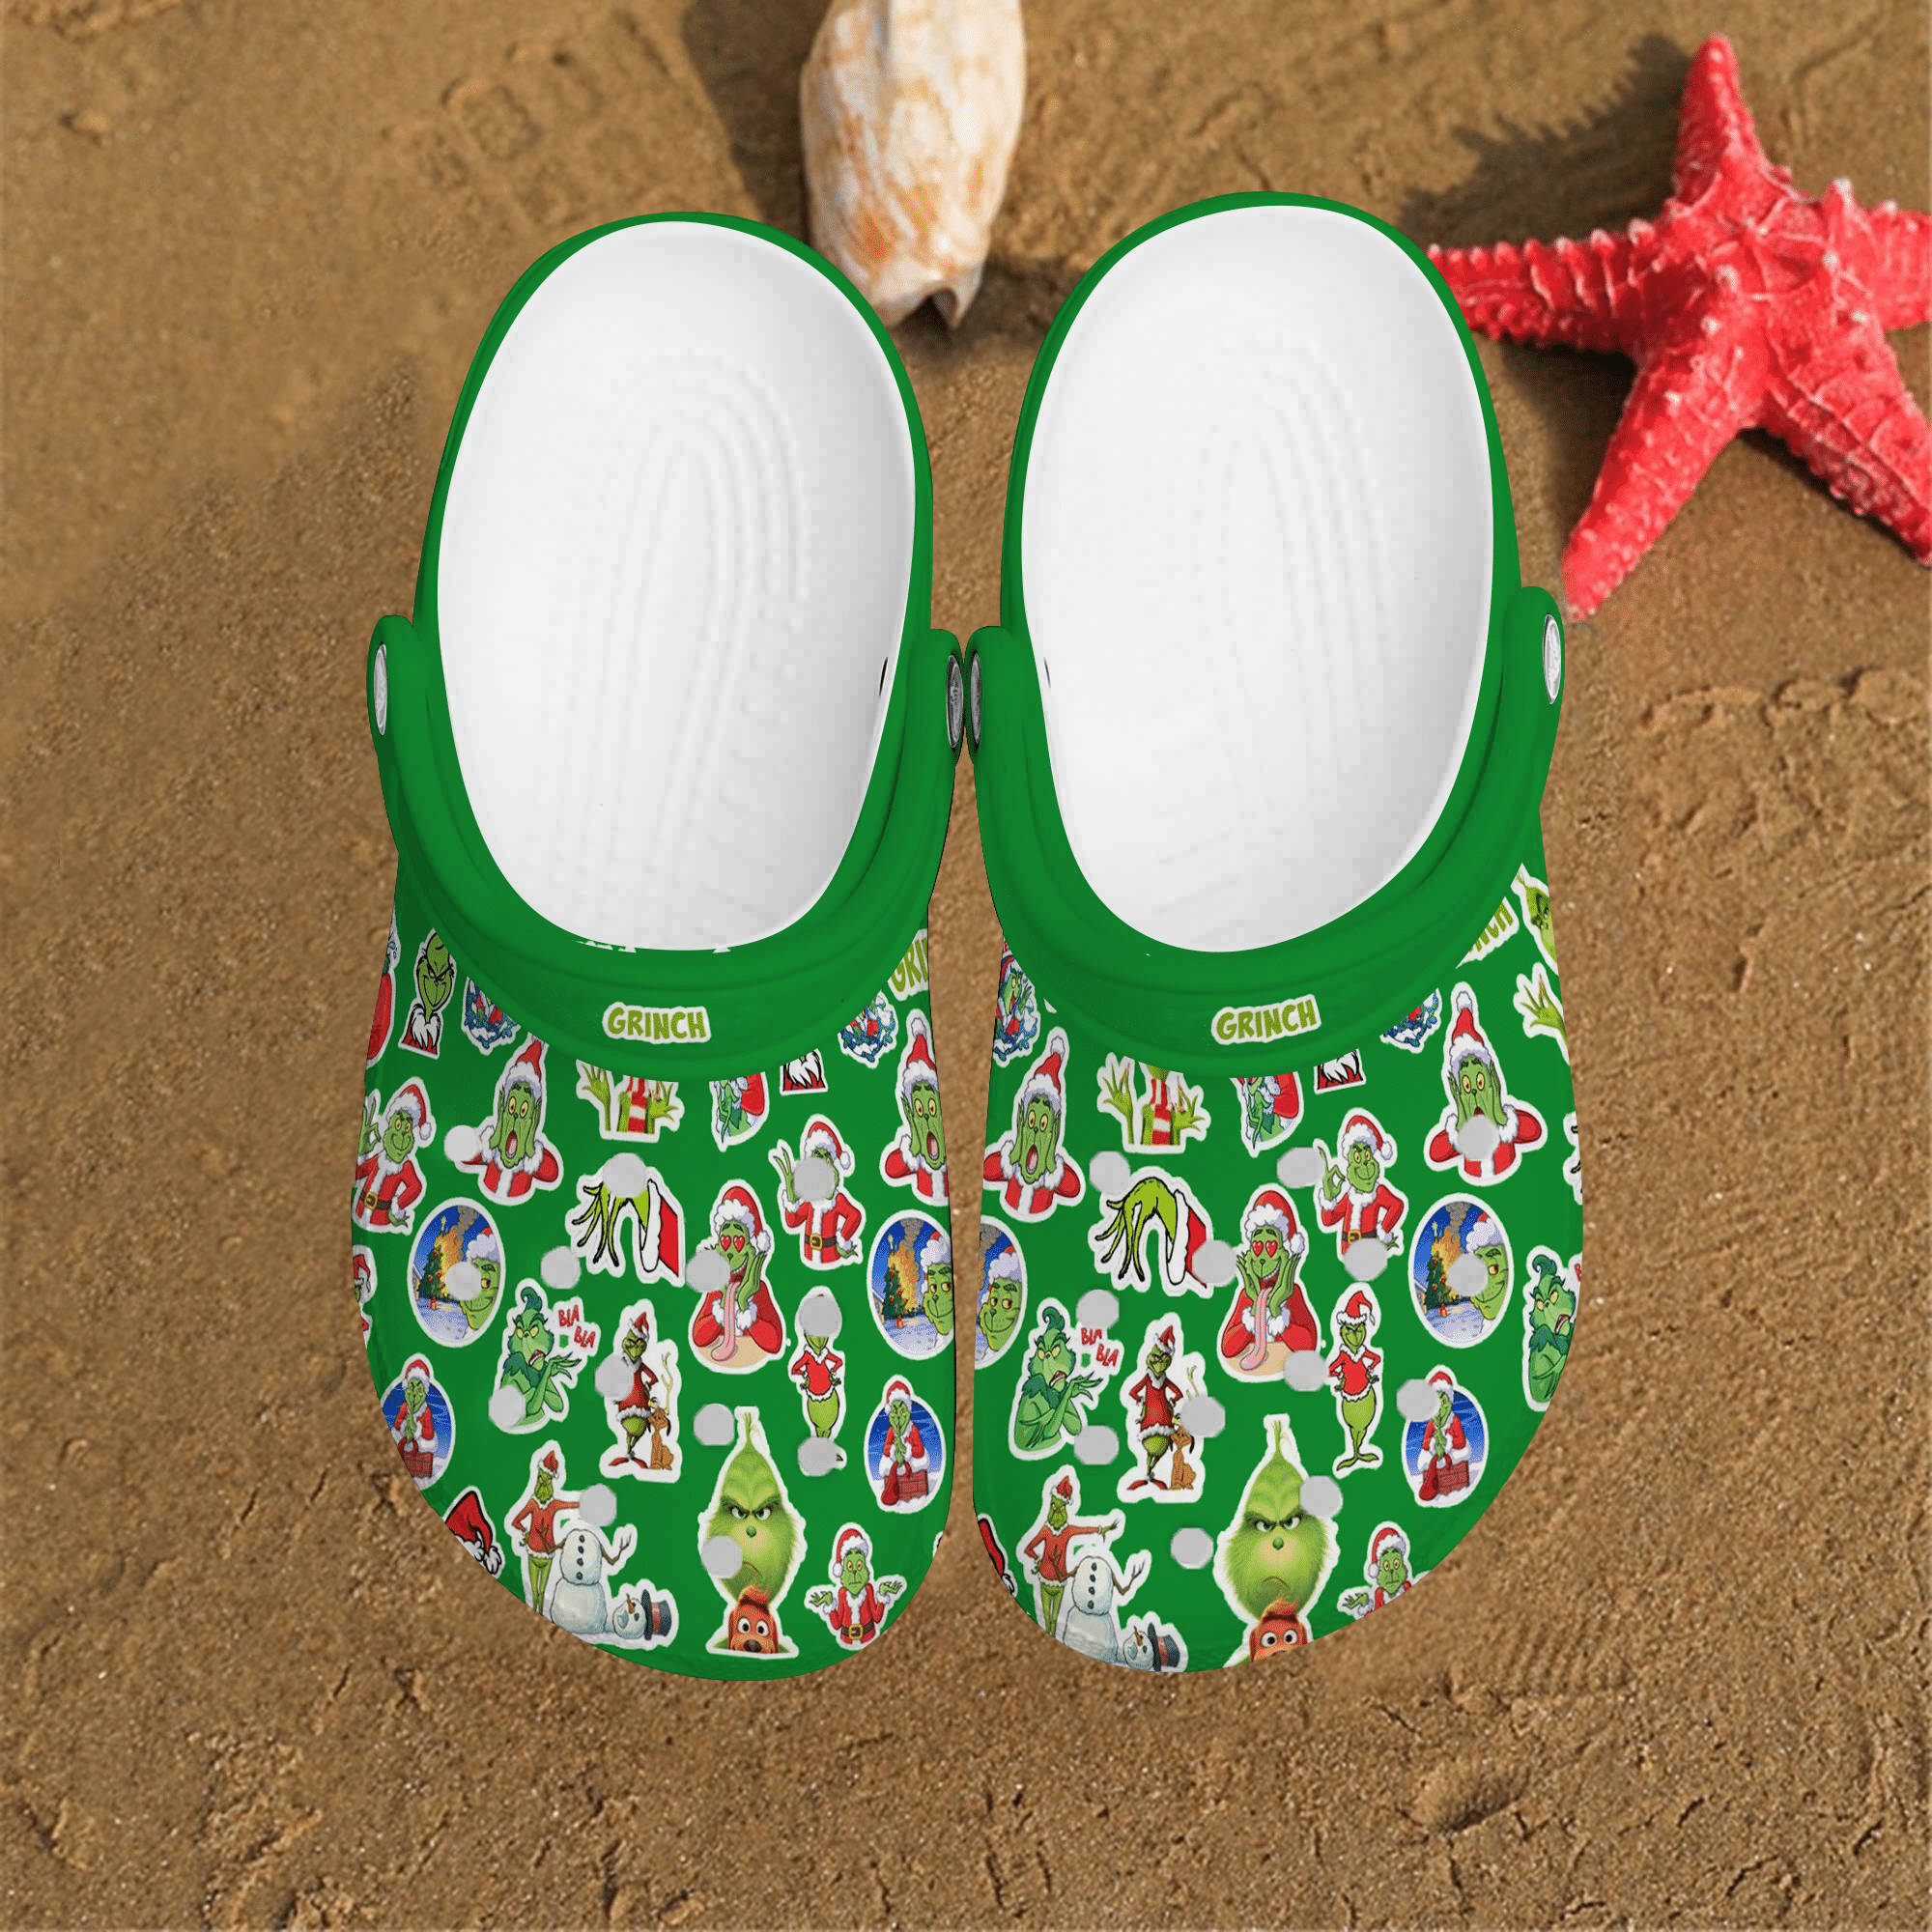 Grinch Grumpy Face Christmas Xmas Gift Full Emotions Comfortable For Man And Women Classic Water Rubber Crocs Crocband Clogs Comfy Footwear